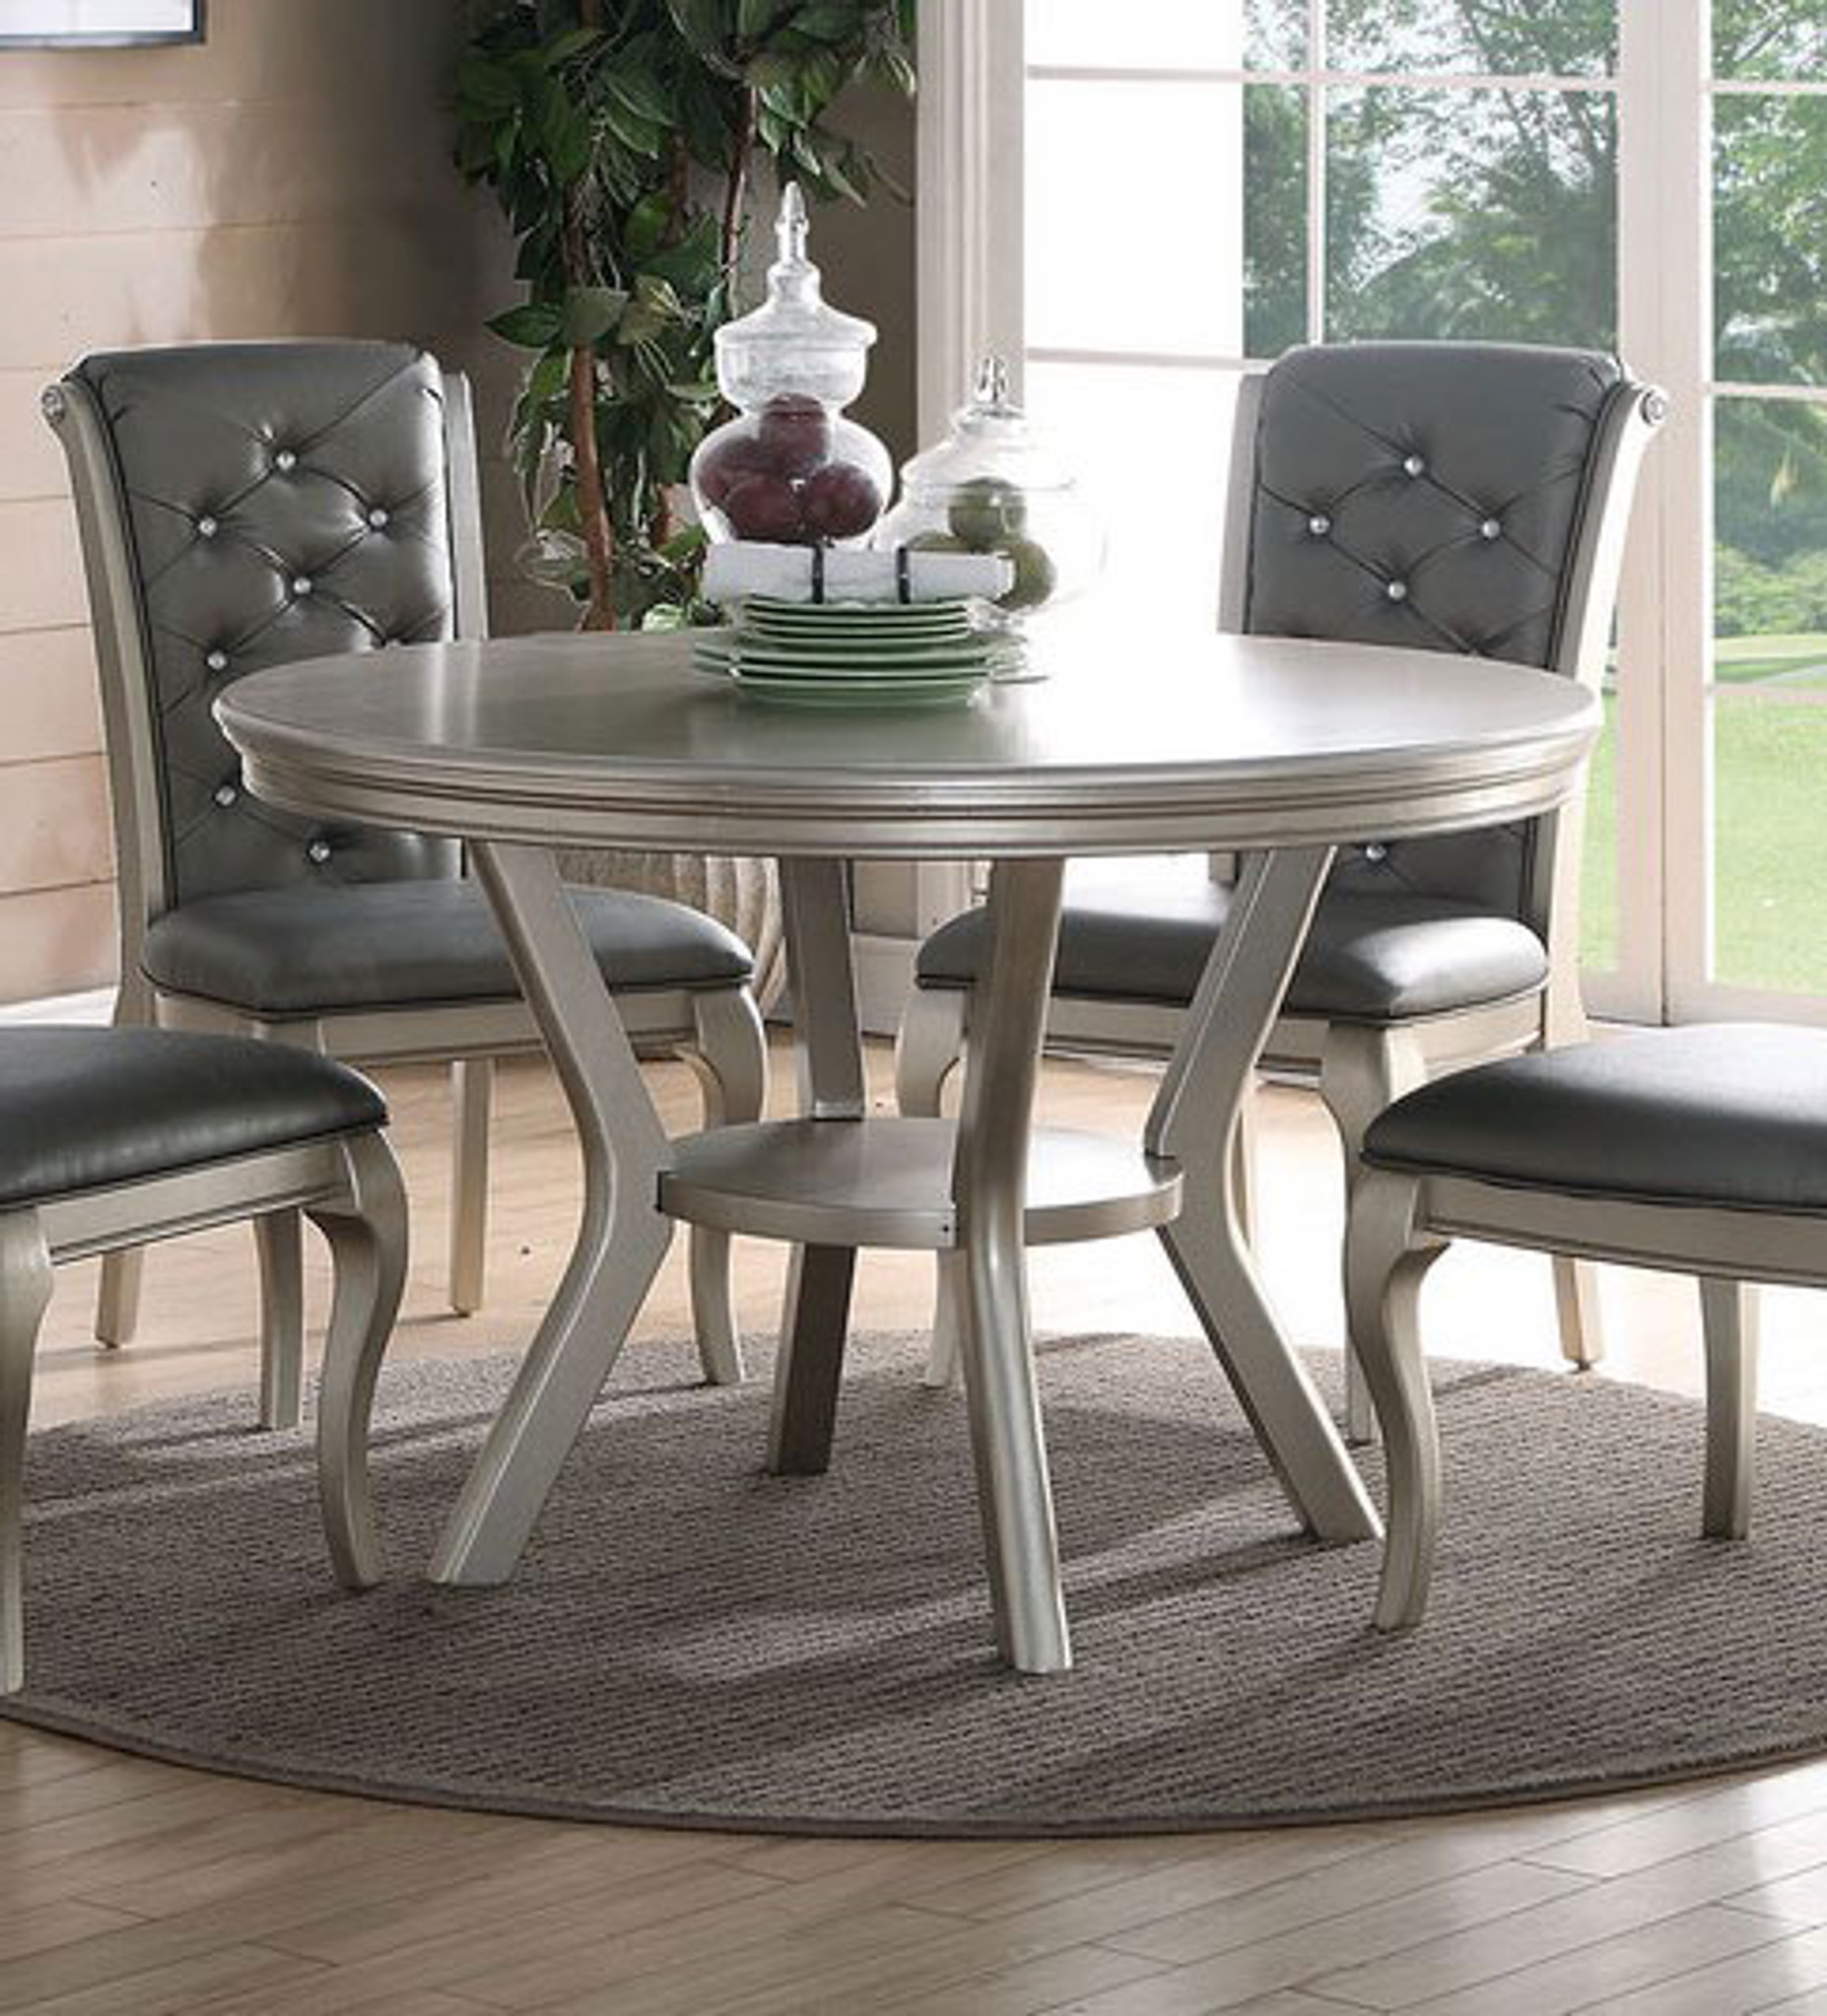 F2150 ANTIQUE SILVER LAVISH STYLE ROUND DINING TABLE COLLECTION By UPDATED